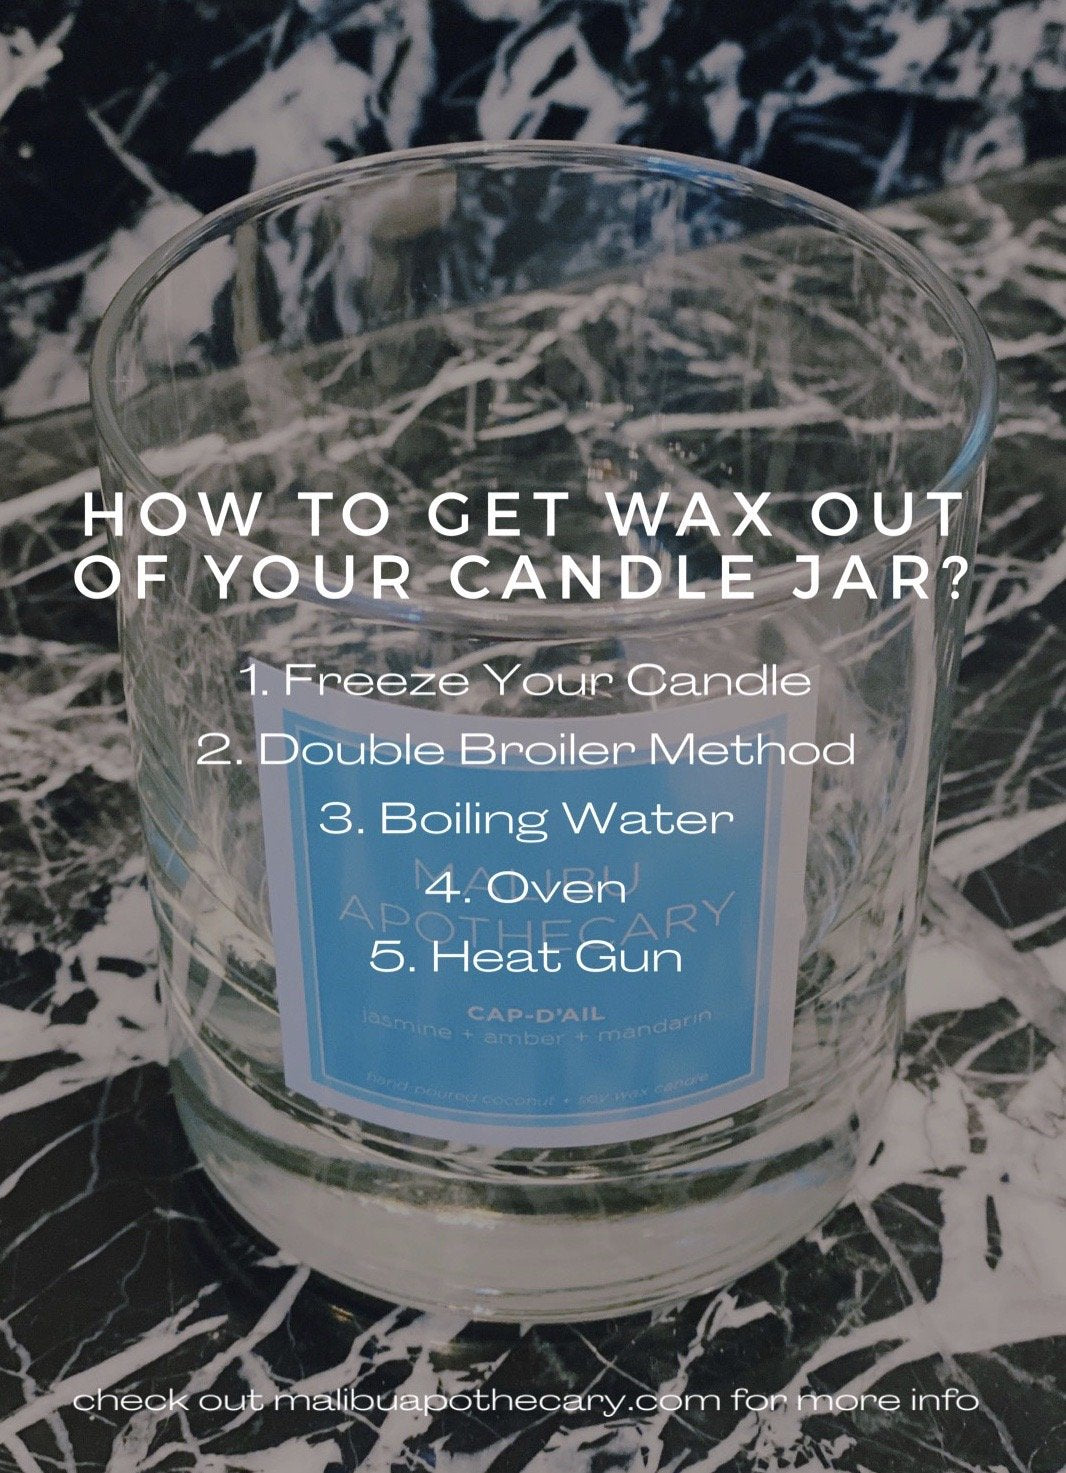 5 Clever Ways to Reuse Candle Jars - The Petit Four